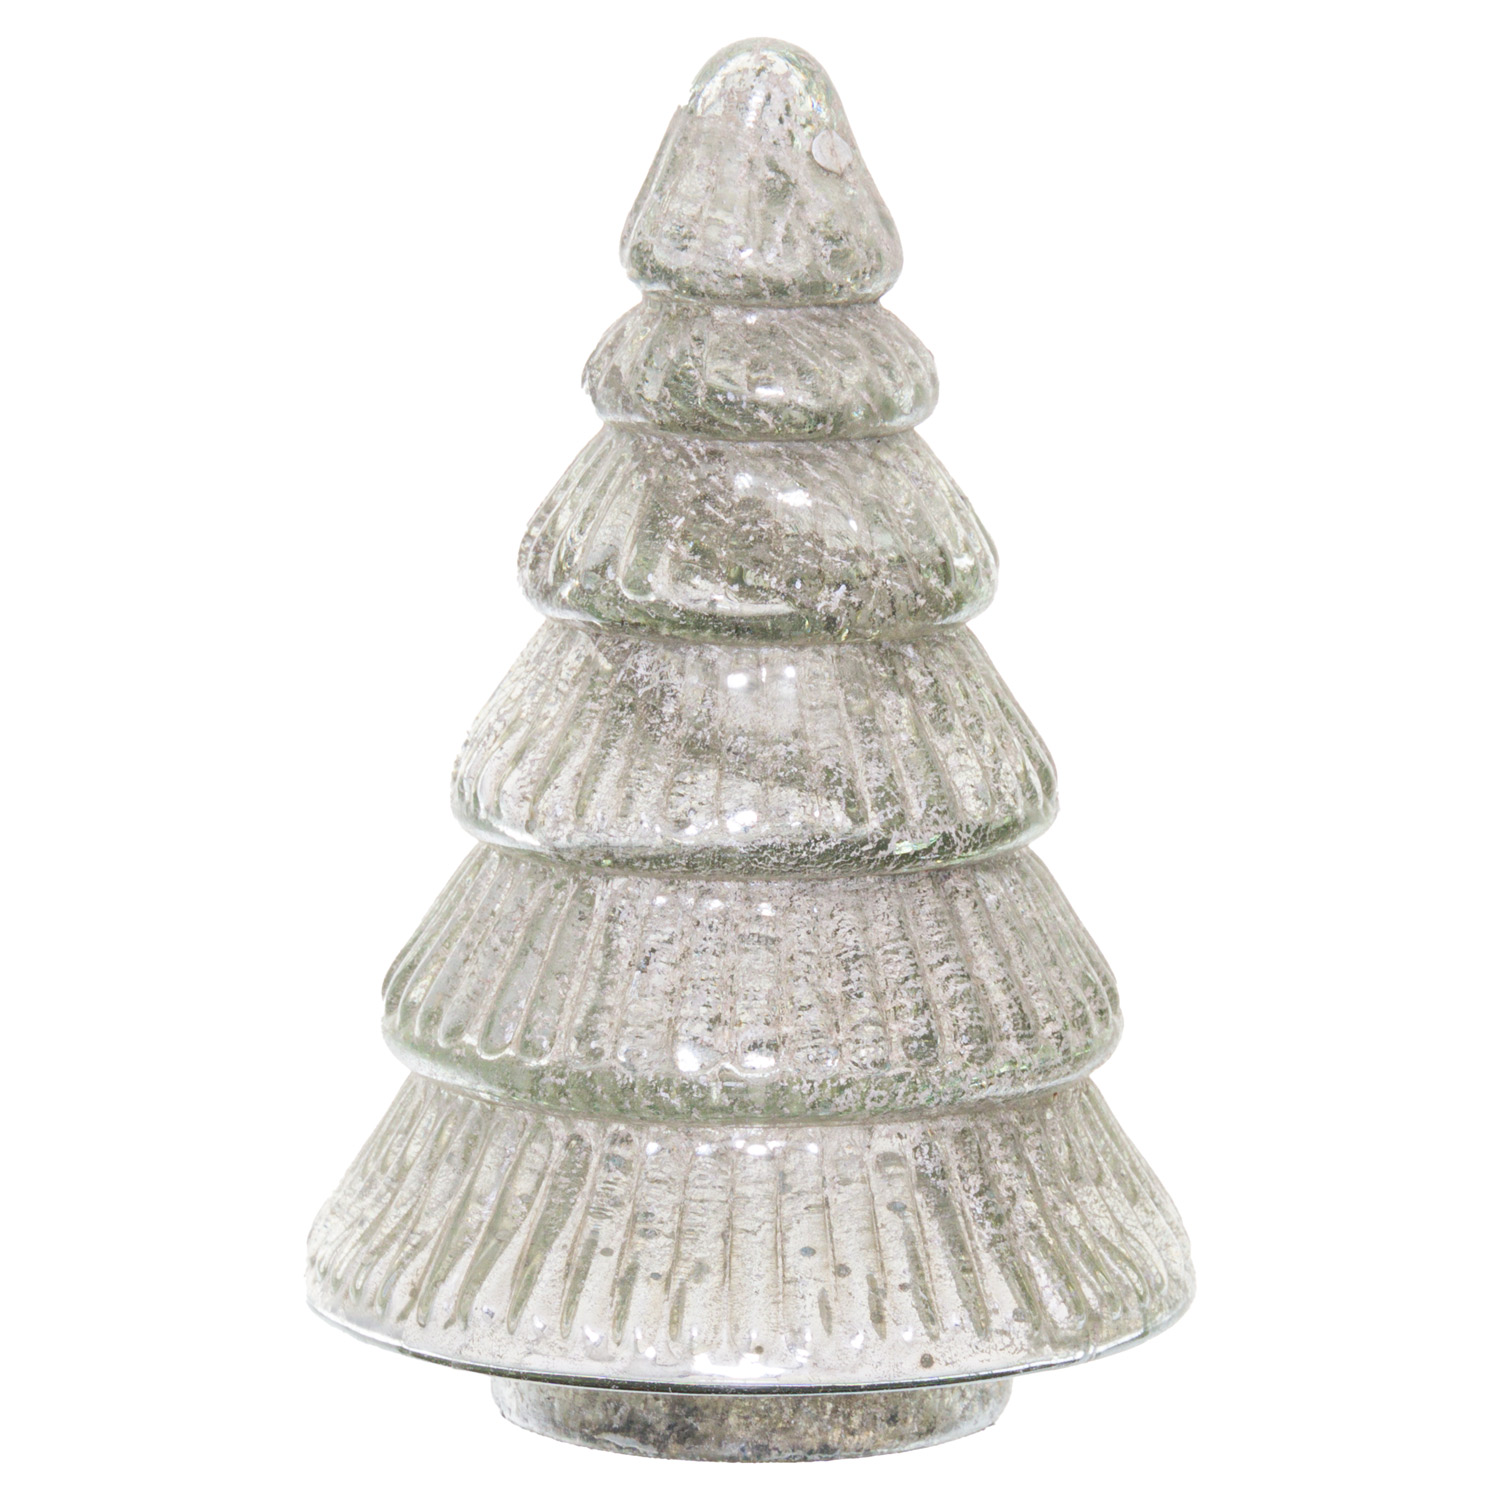 The Noel Collection Tiered Decorative Small Glass Tree - Image 1